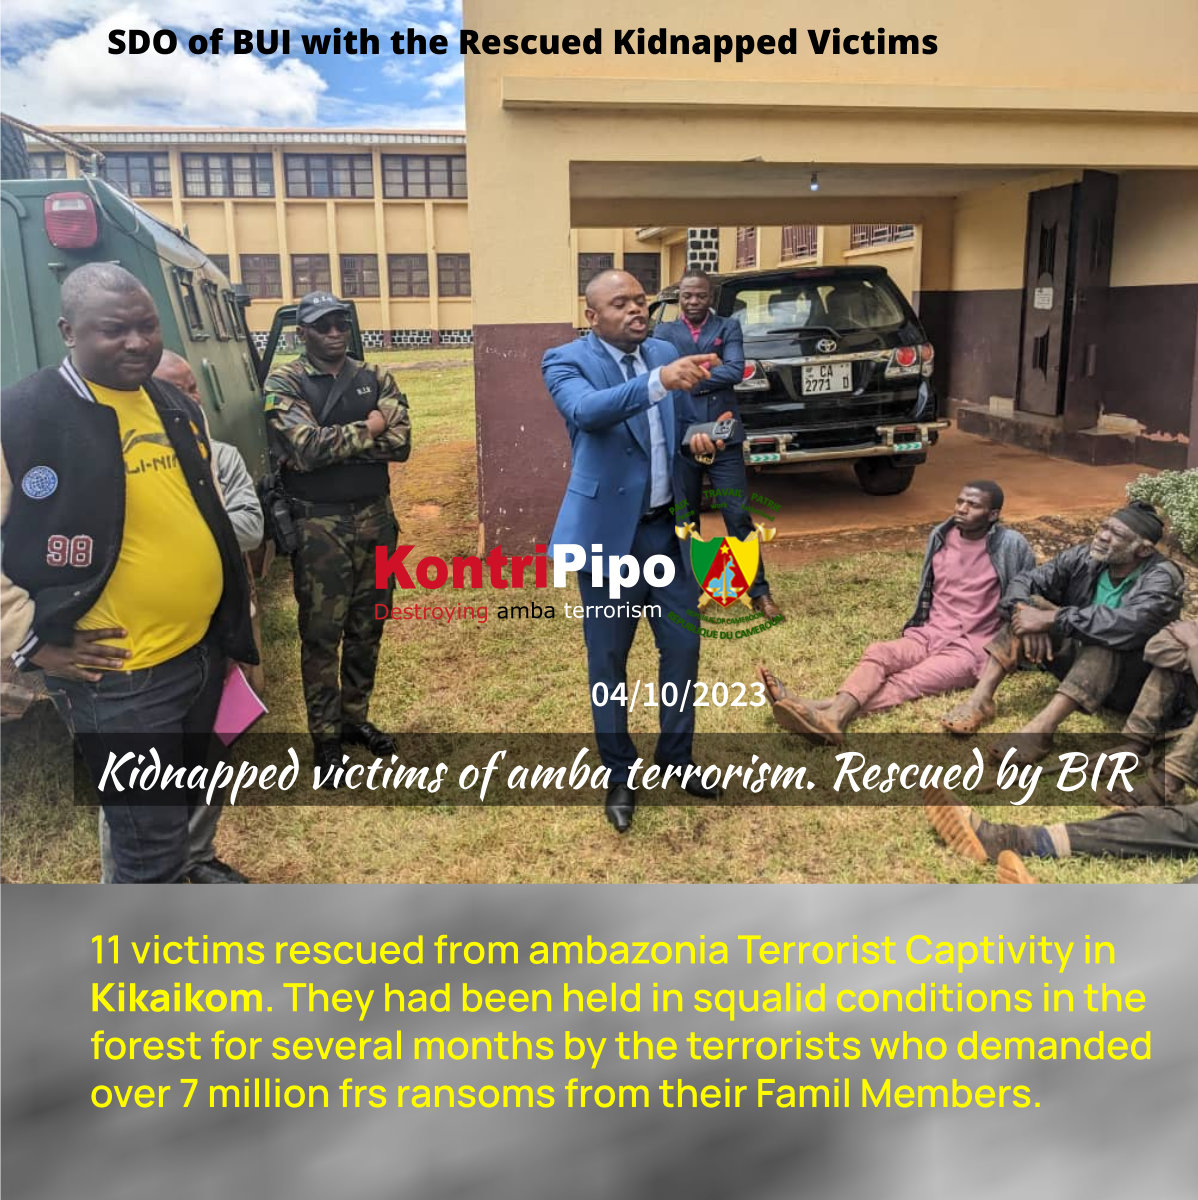 SDO of BUI with the 11 Kidnapped victions of ambazonia terrorism